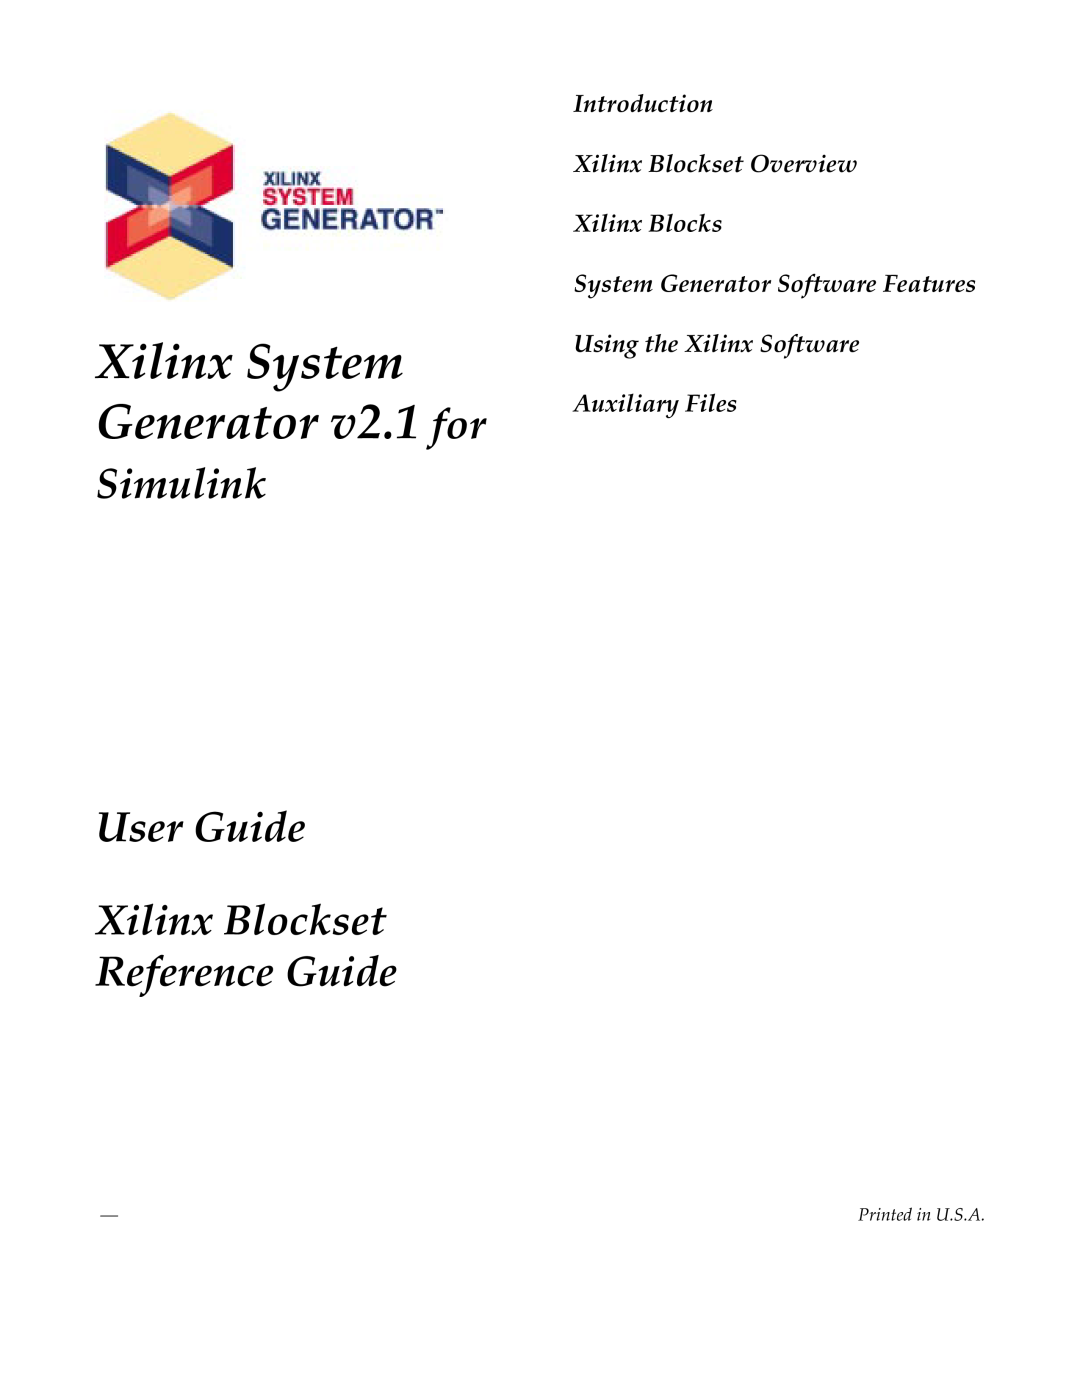 Xilinx V2.1 manual Printed in U.S.A, Xilinx System Generator v2.1 for, Simulink User Guide 